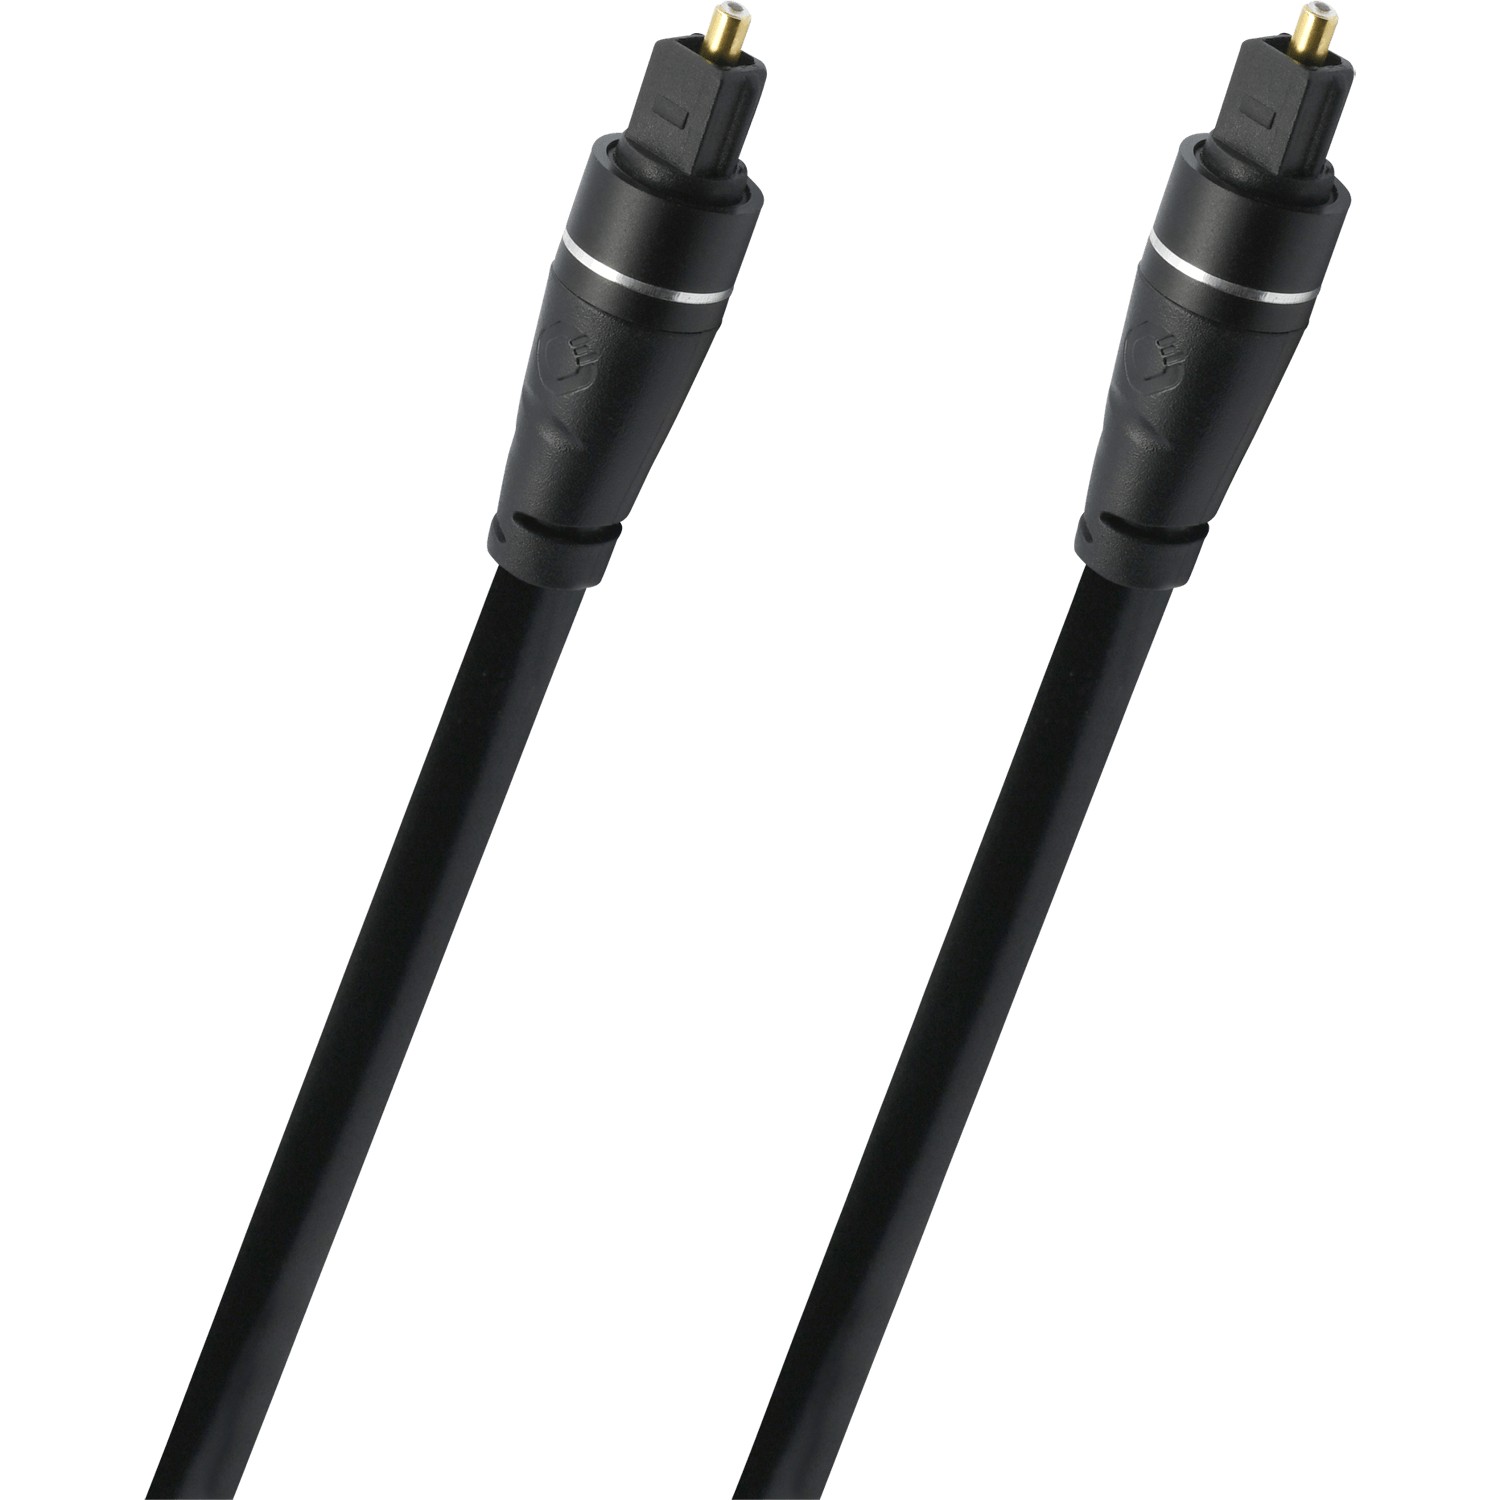 Кабели межблочные аудио Oehlbach EXCELLENCE Select Opto Link, Toslink cable 3,0m sw, D1C33134 кабели межблочные аудио vincent xlr cinch cable 2x0 6m aluminium case